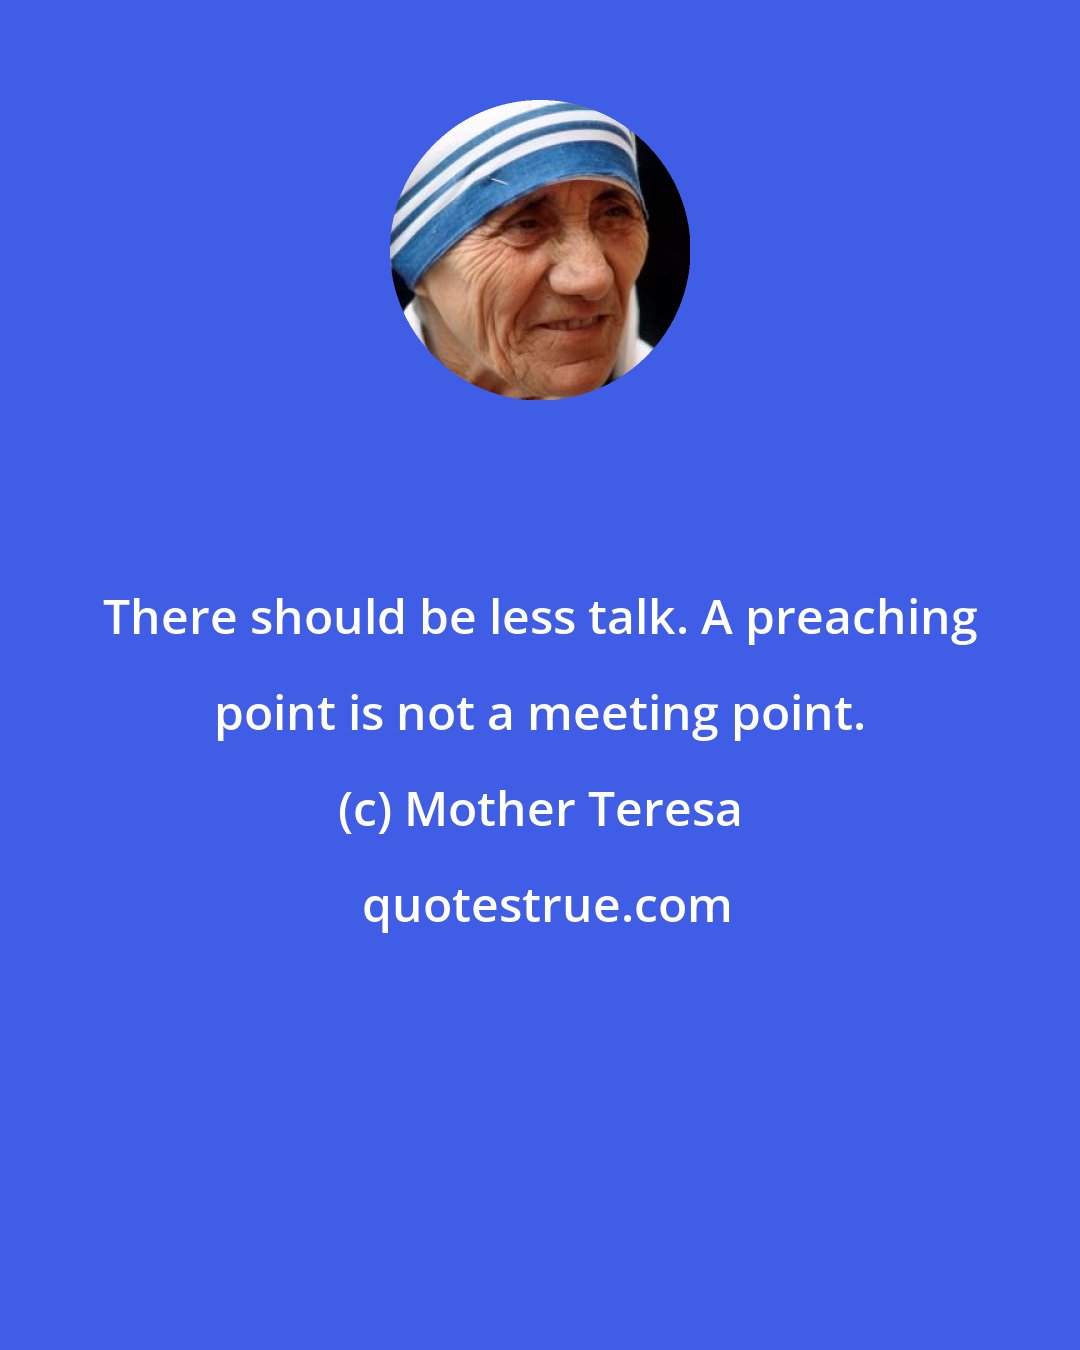 Mother Teresa: There should be less talk. A preaching point is not a meeting point.